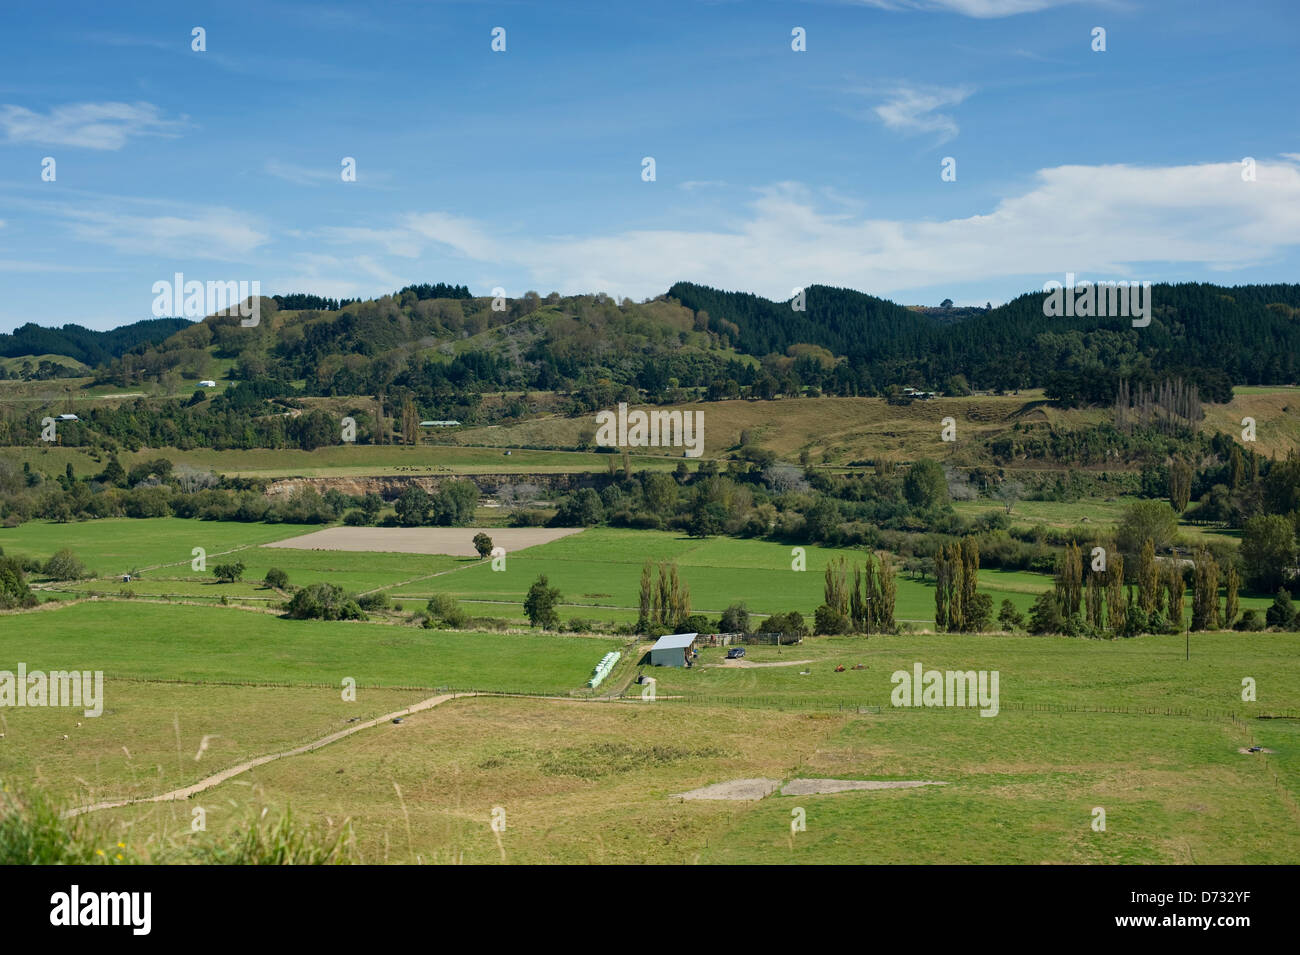 A scene of rural New Zealand farm land- Pohangina Valley in the Manawatu region in the lower North Island Stock Photo